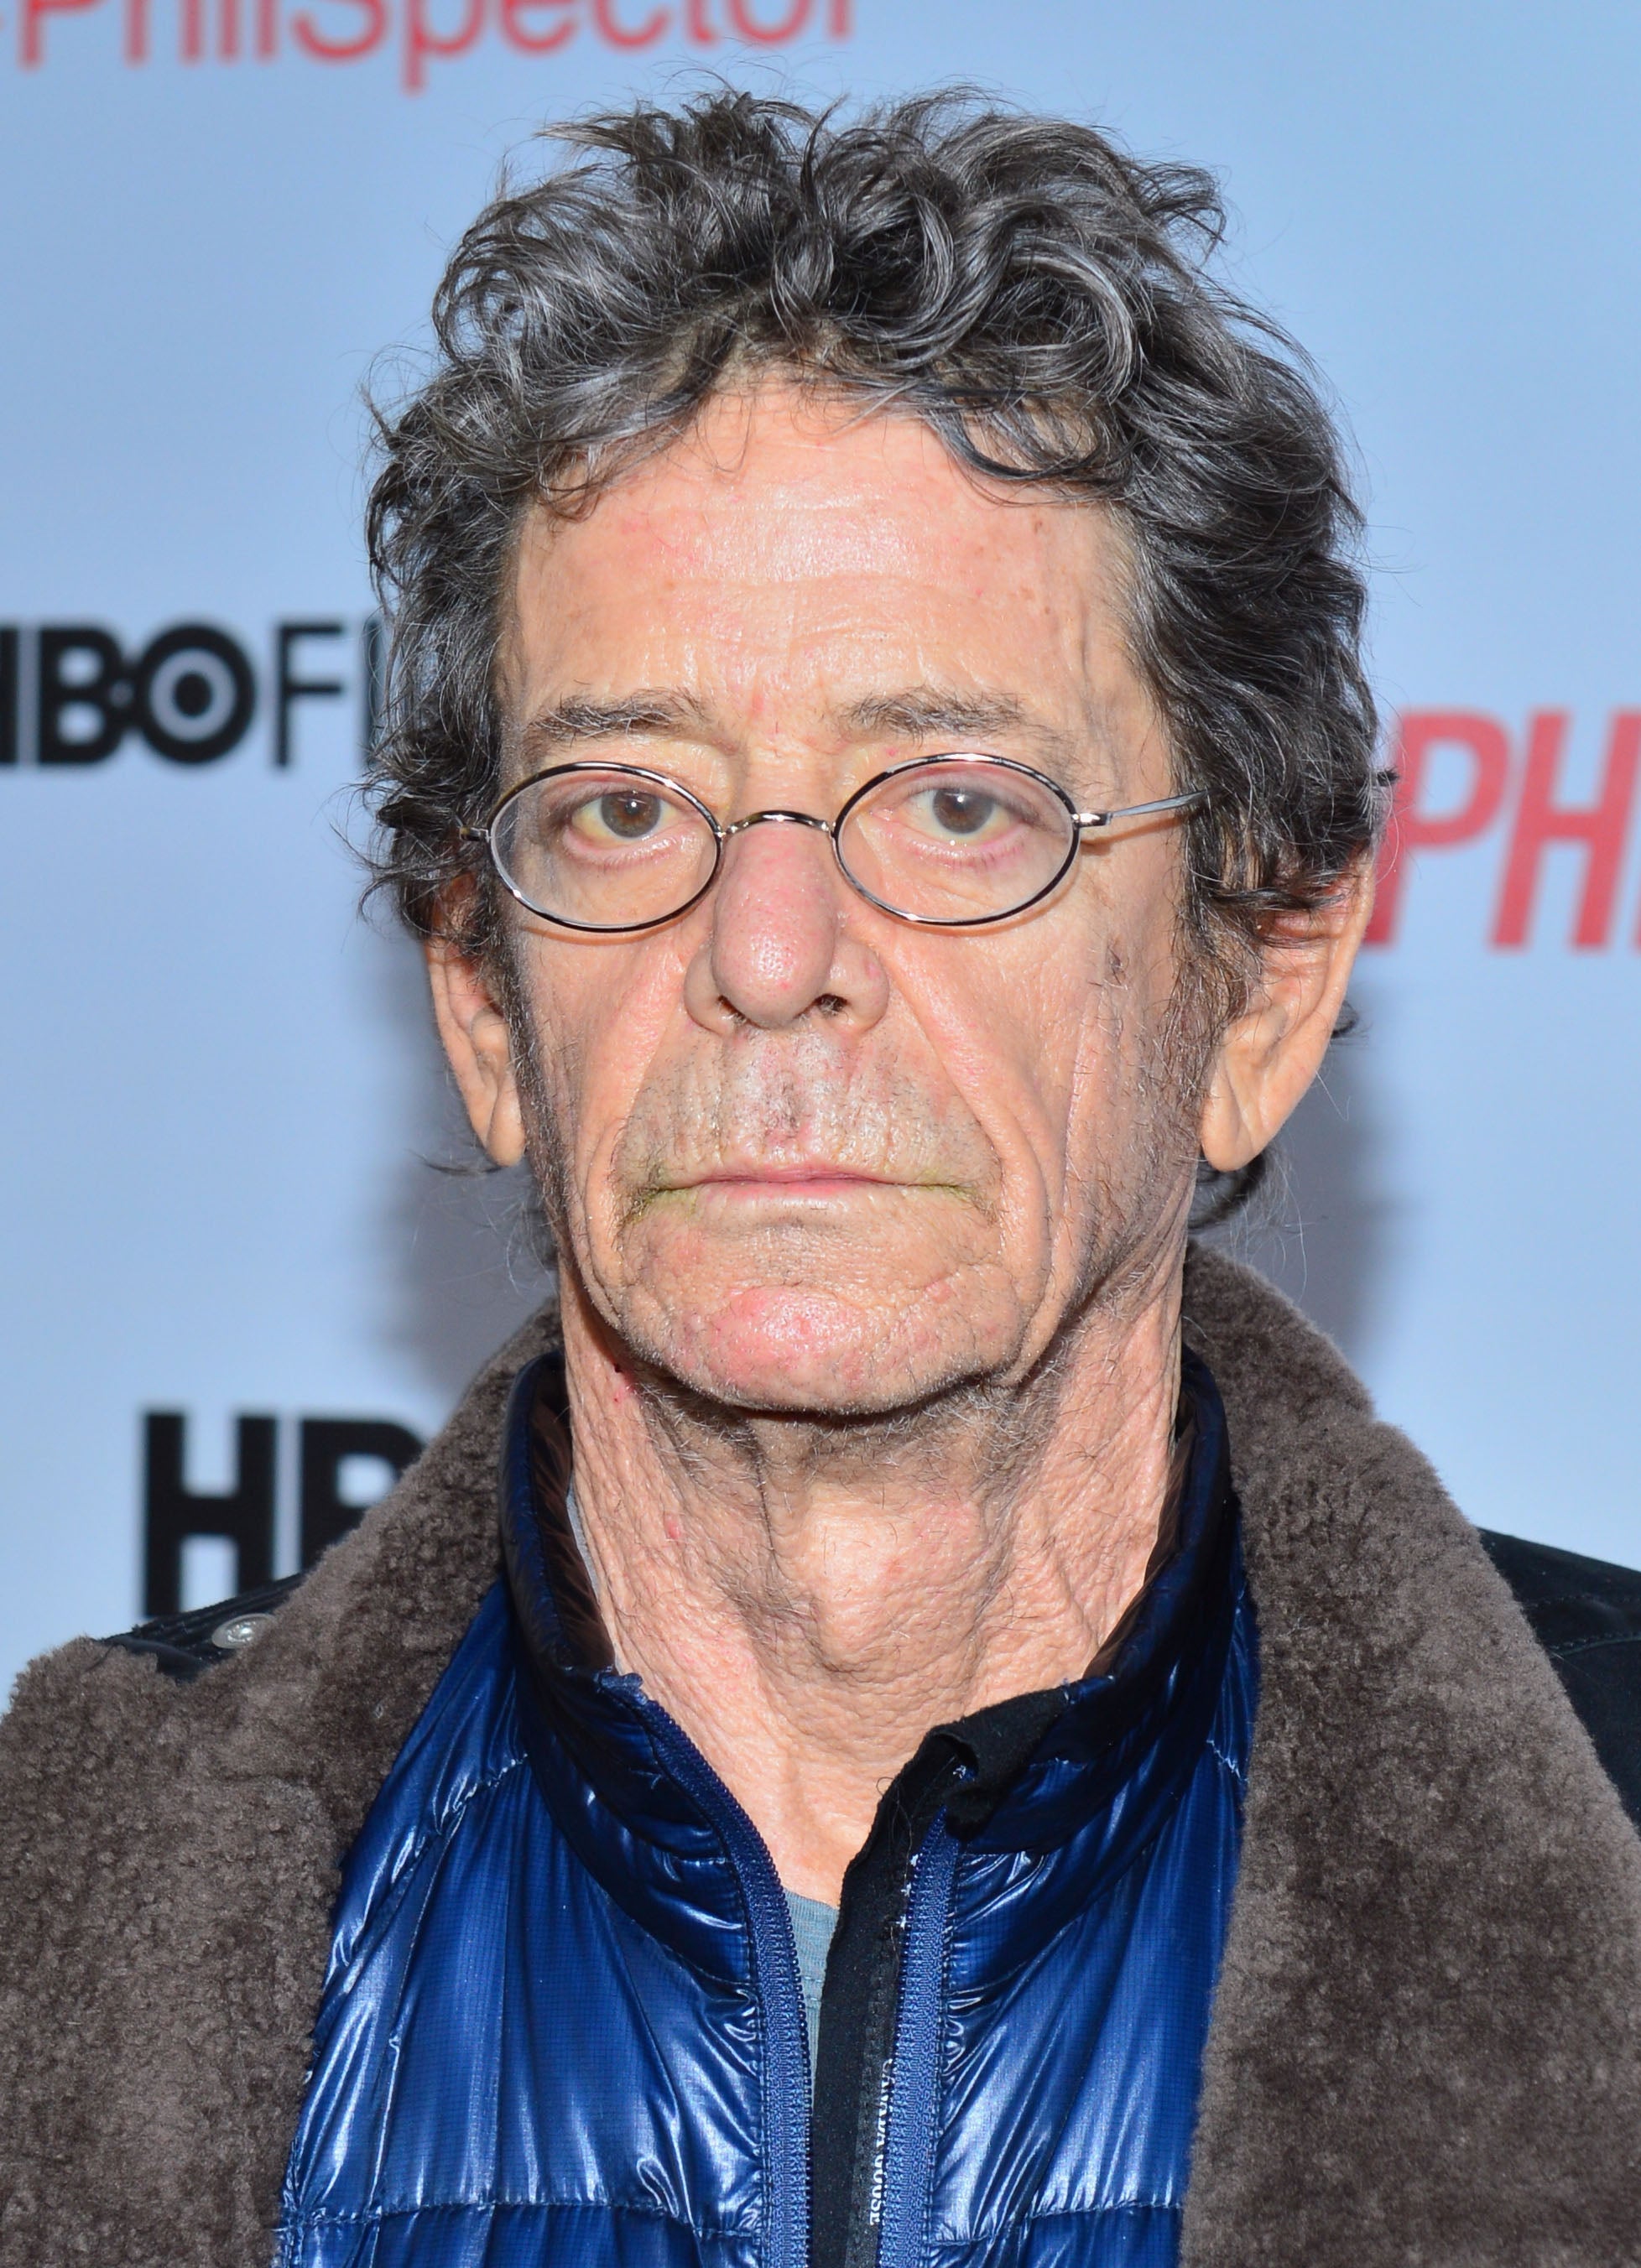 Transformer Lou Reed Bigger And Stronger Than Ever After Liver Transplant The Independent